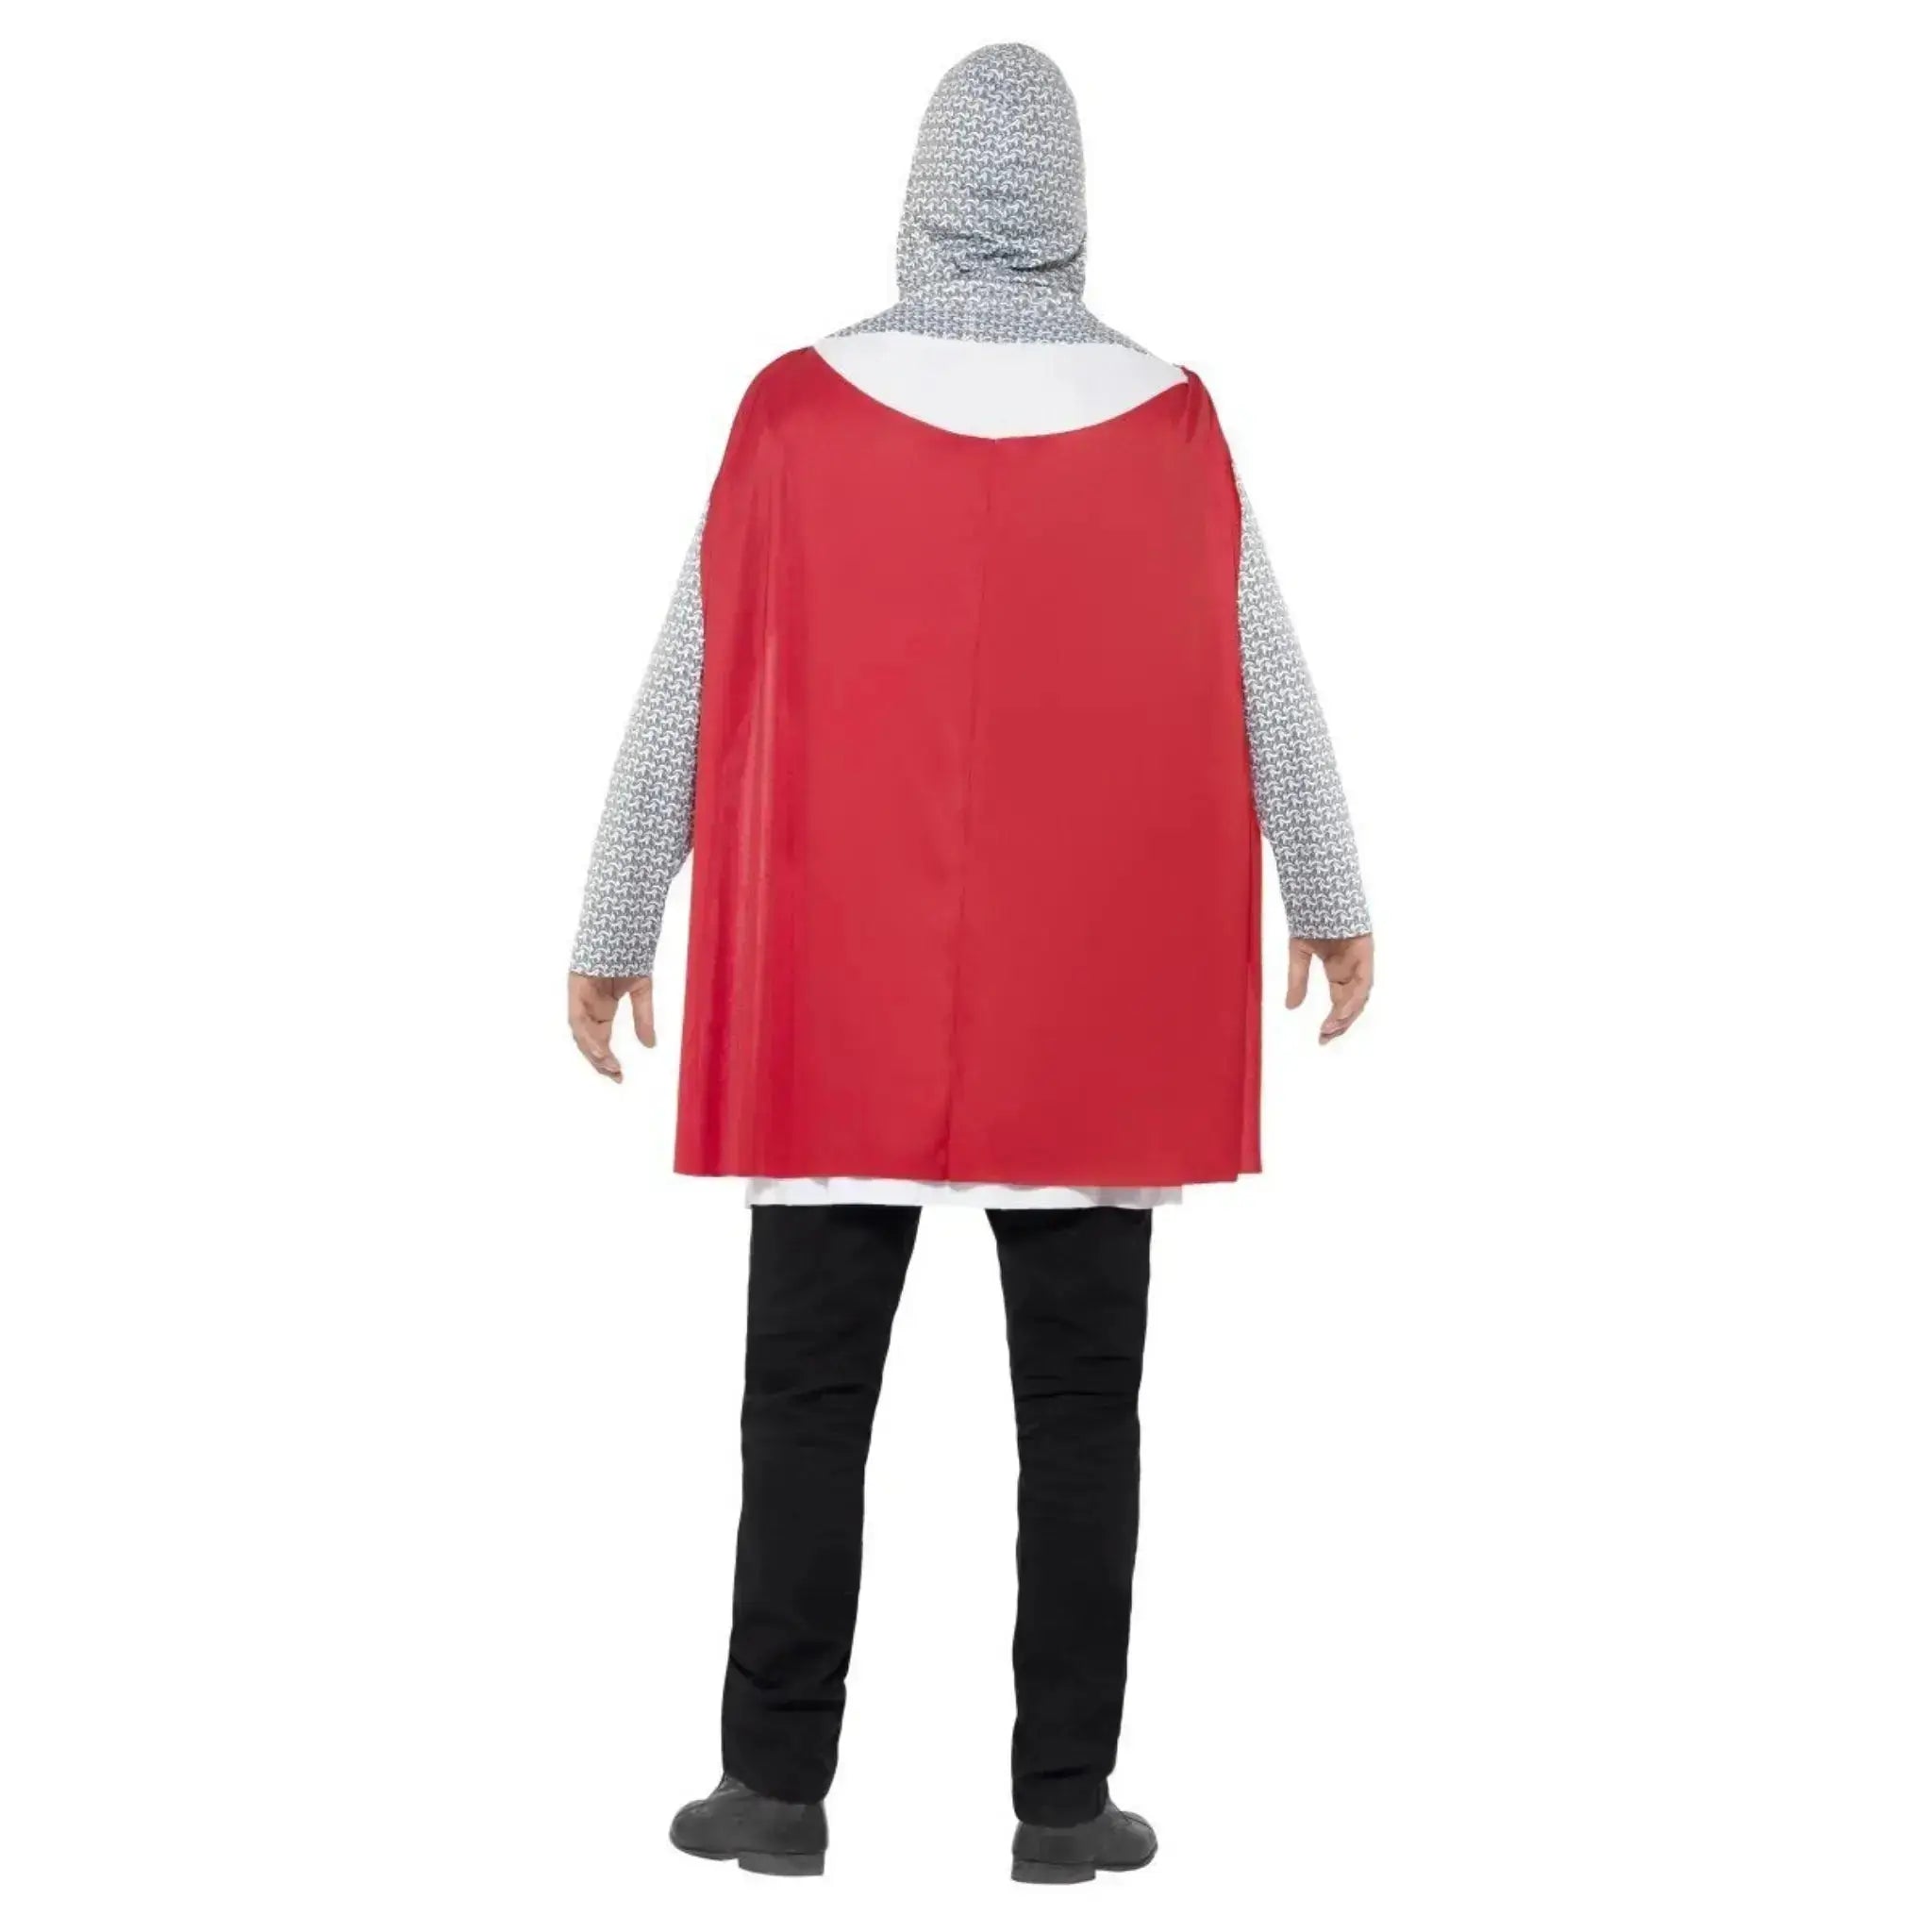 Knight Costume | The Party Hut